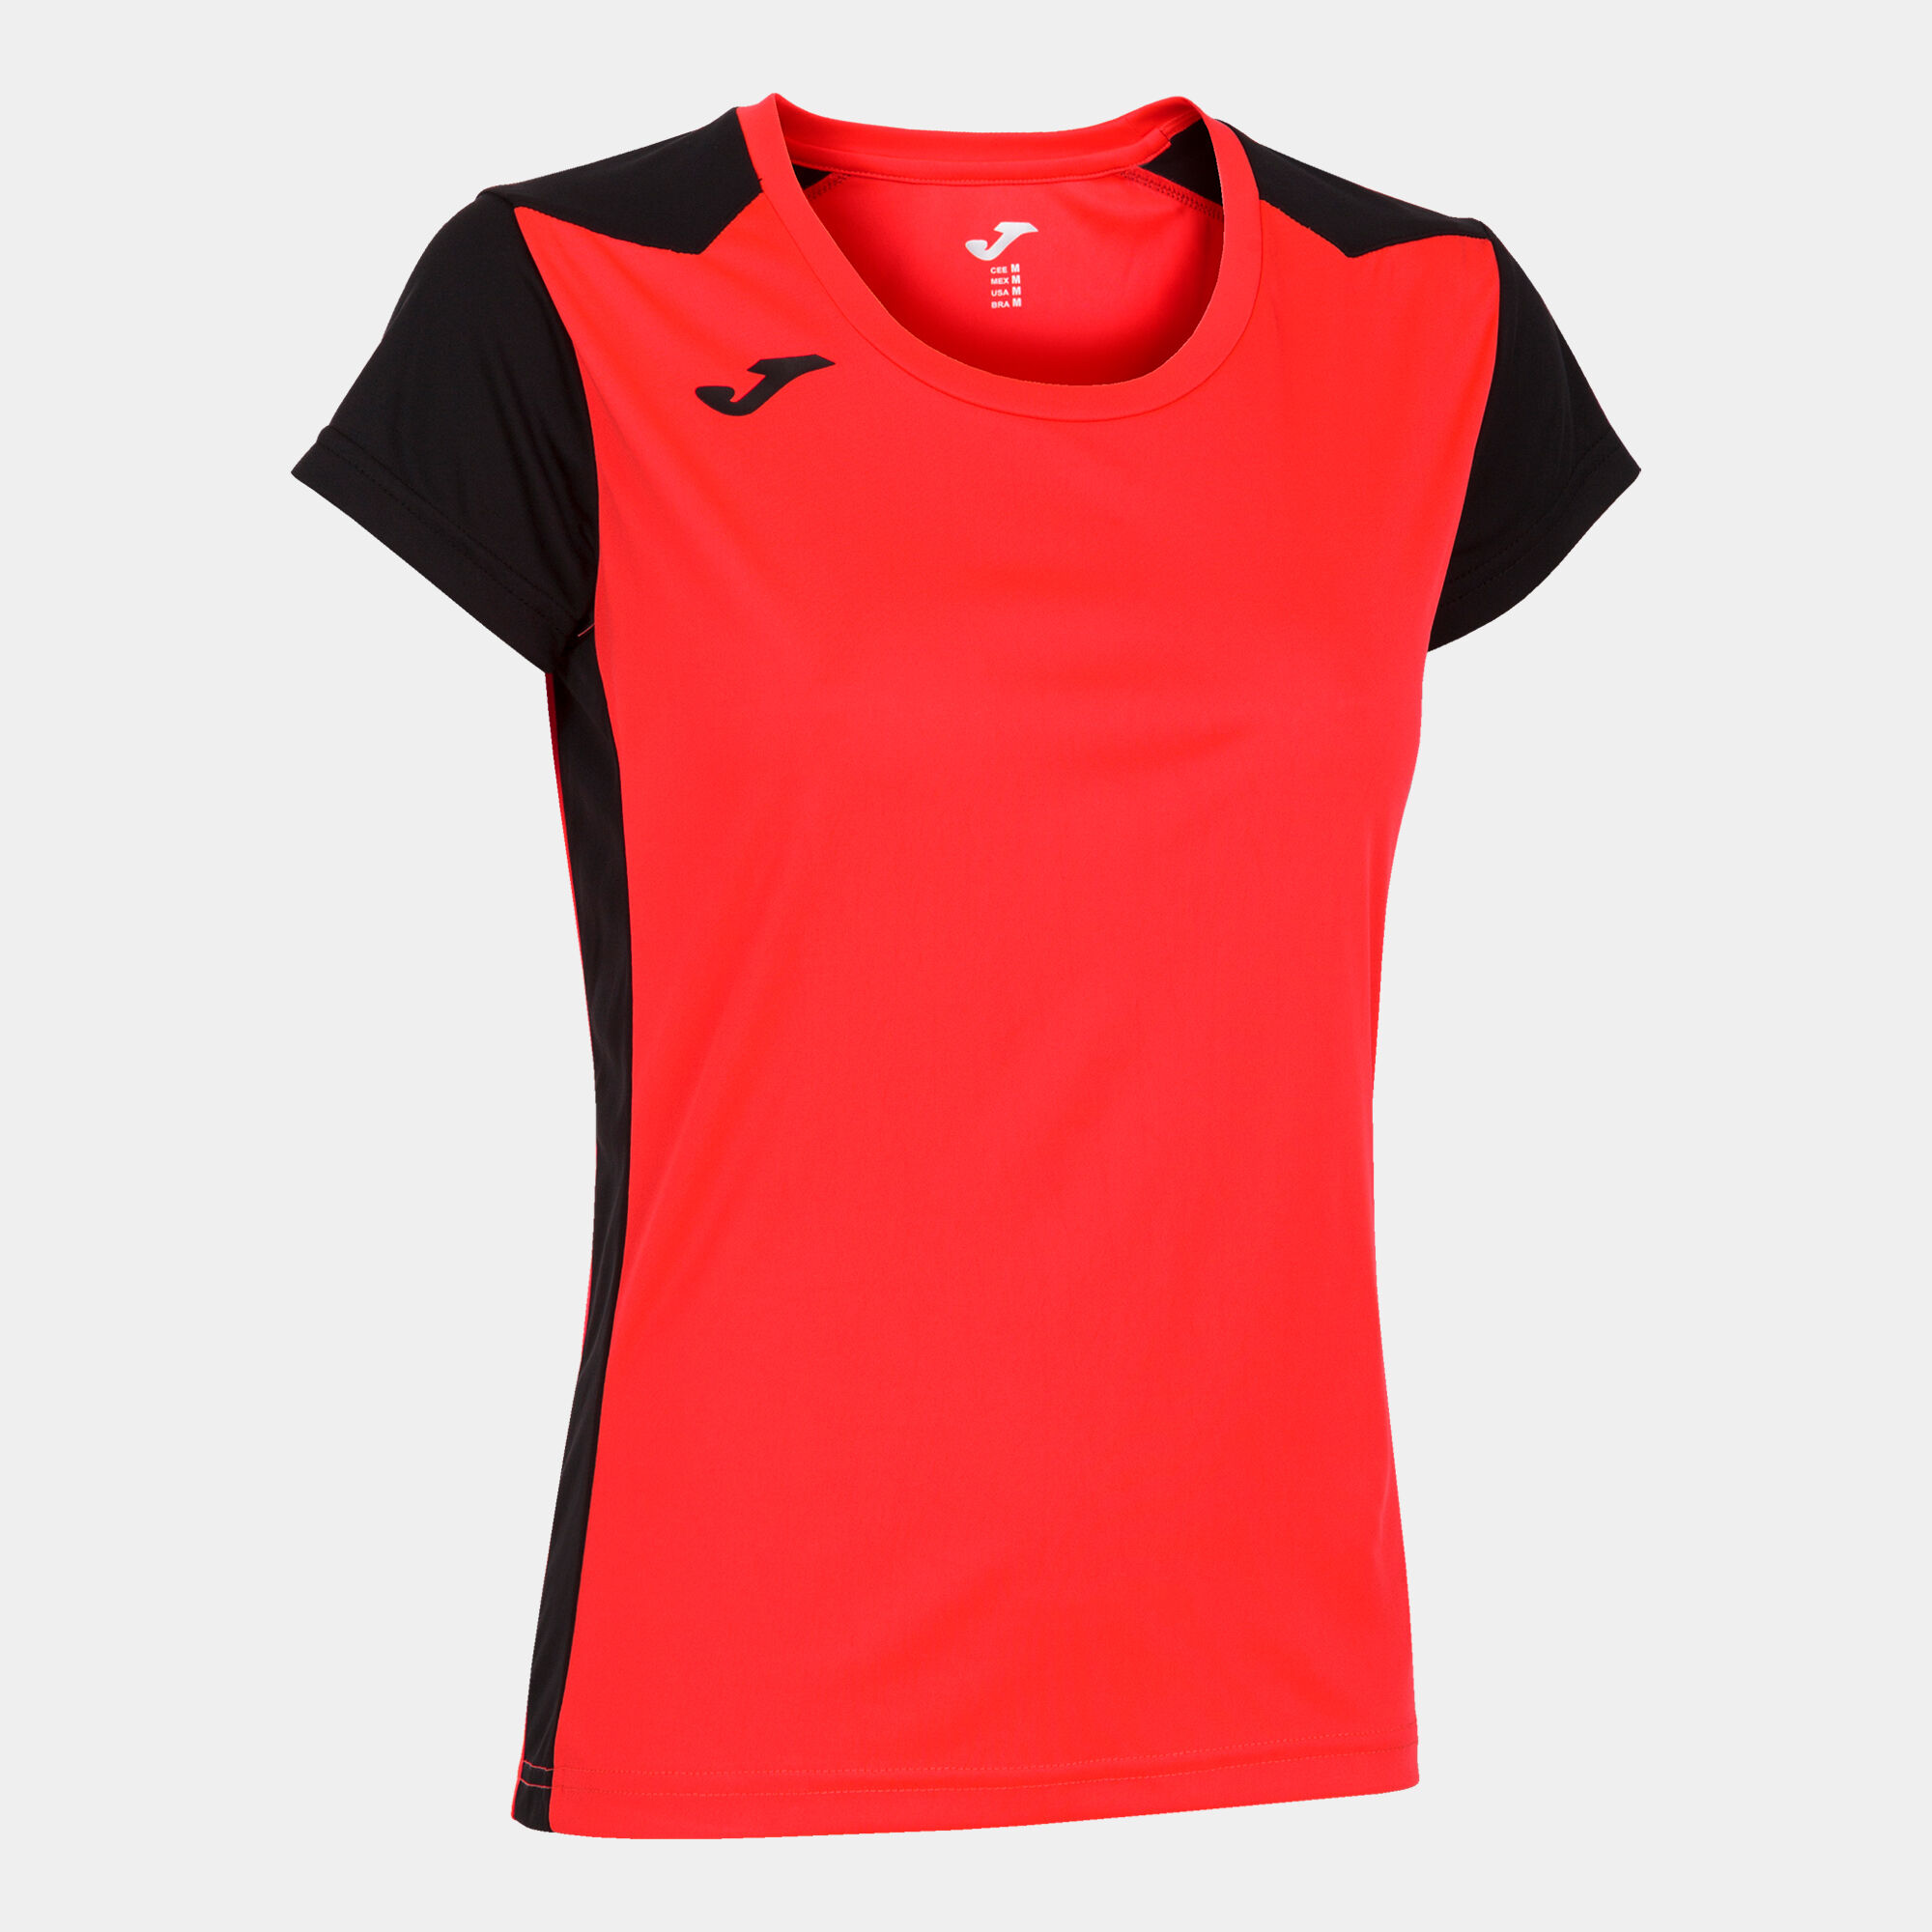 MAILLOT MANCHES COURTES FEMME RECORD II CORAIL FLUO NOIR